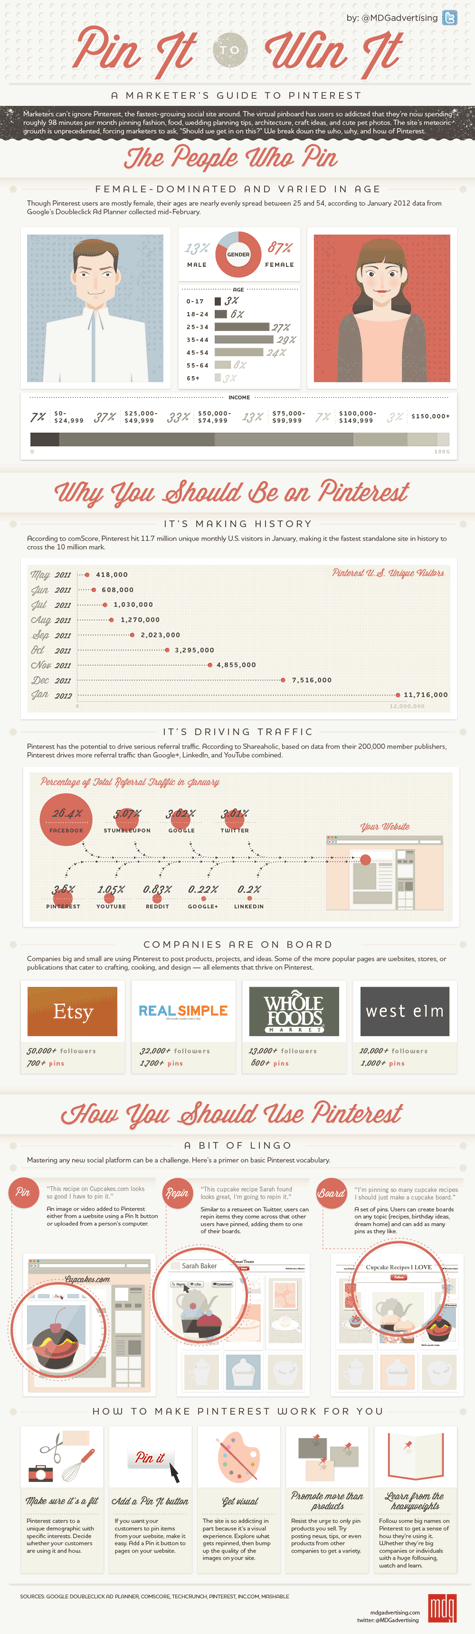 infographic marketers guide to pinterest 475